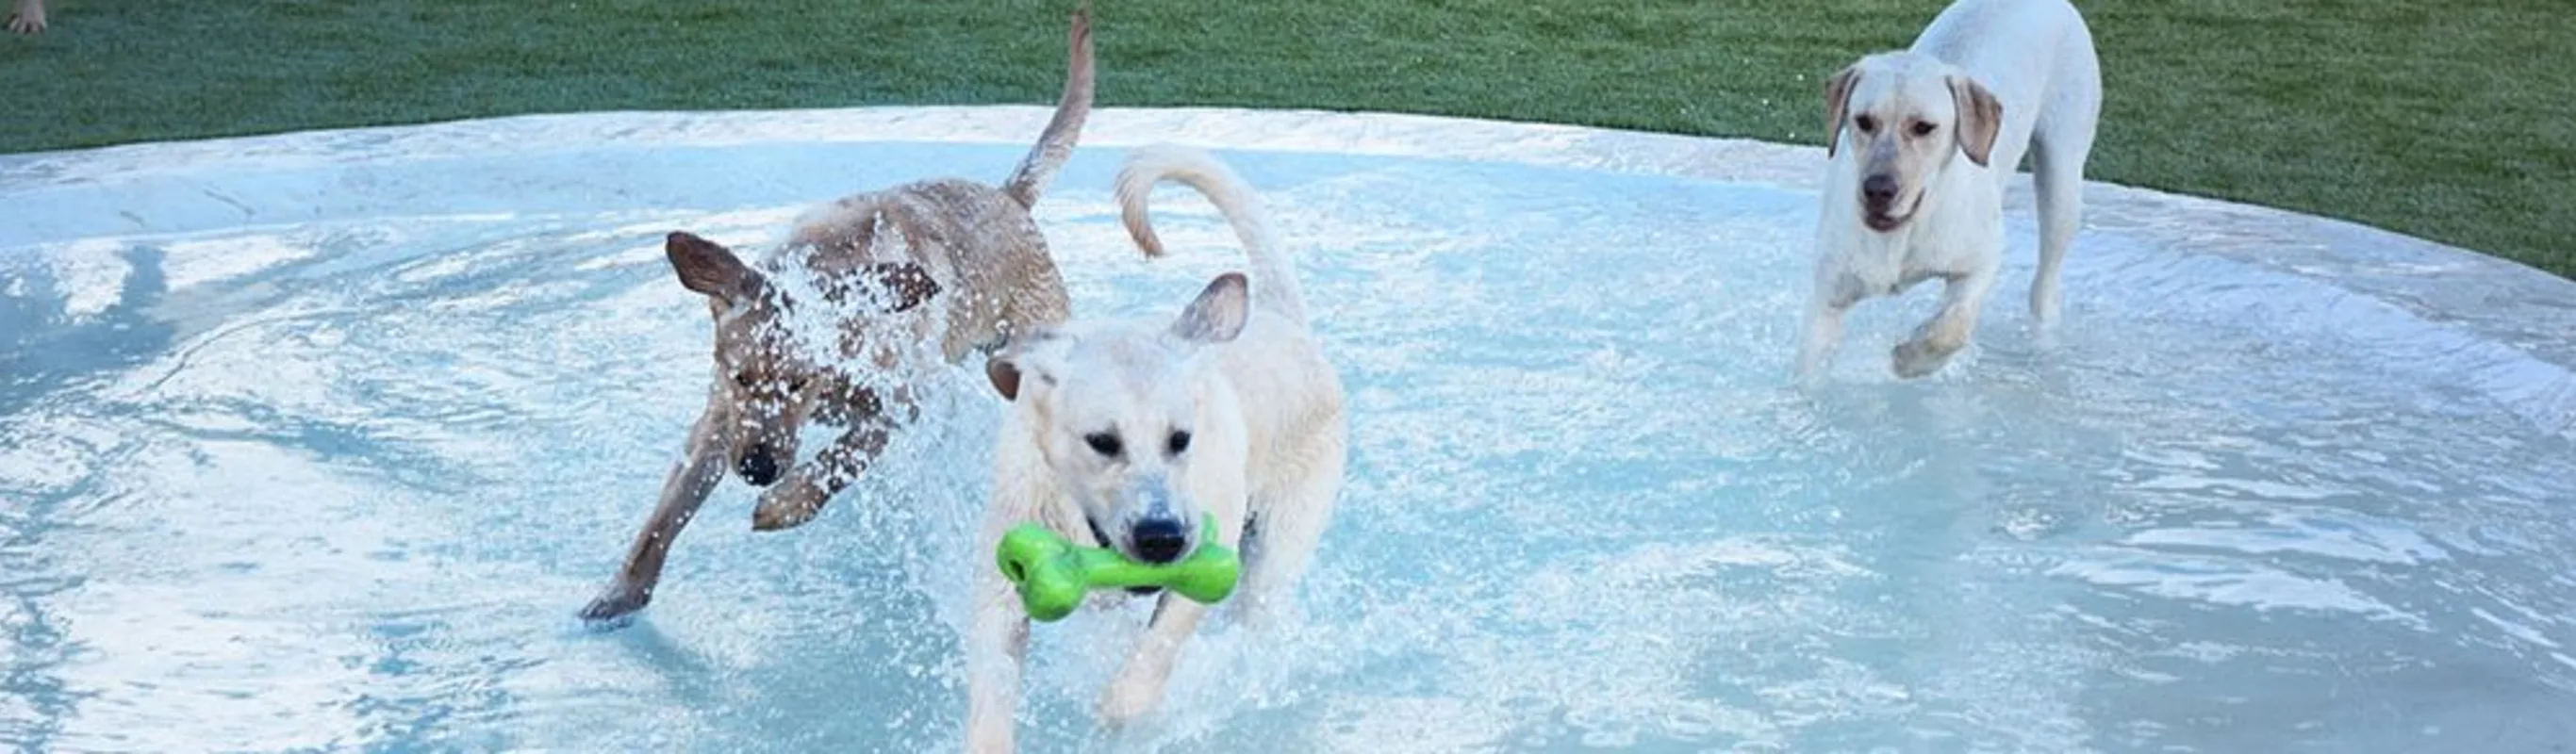 Dogs playing in pool.